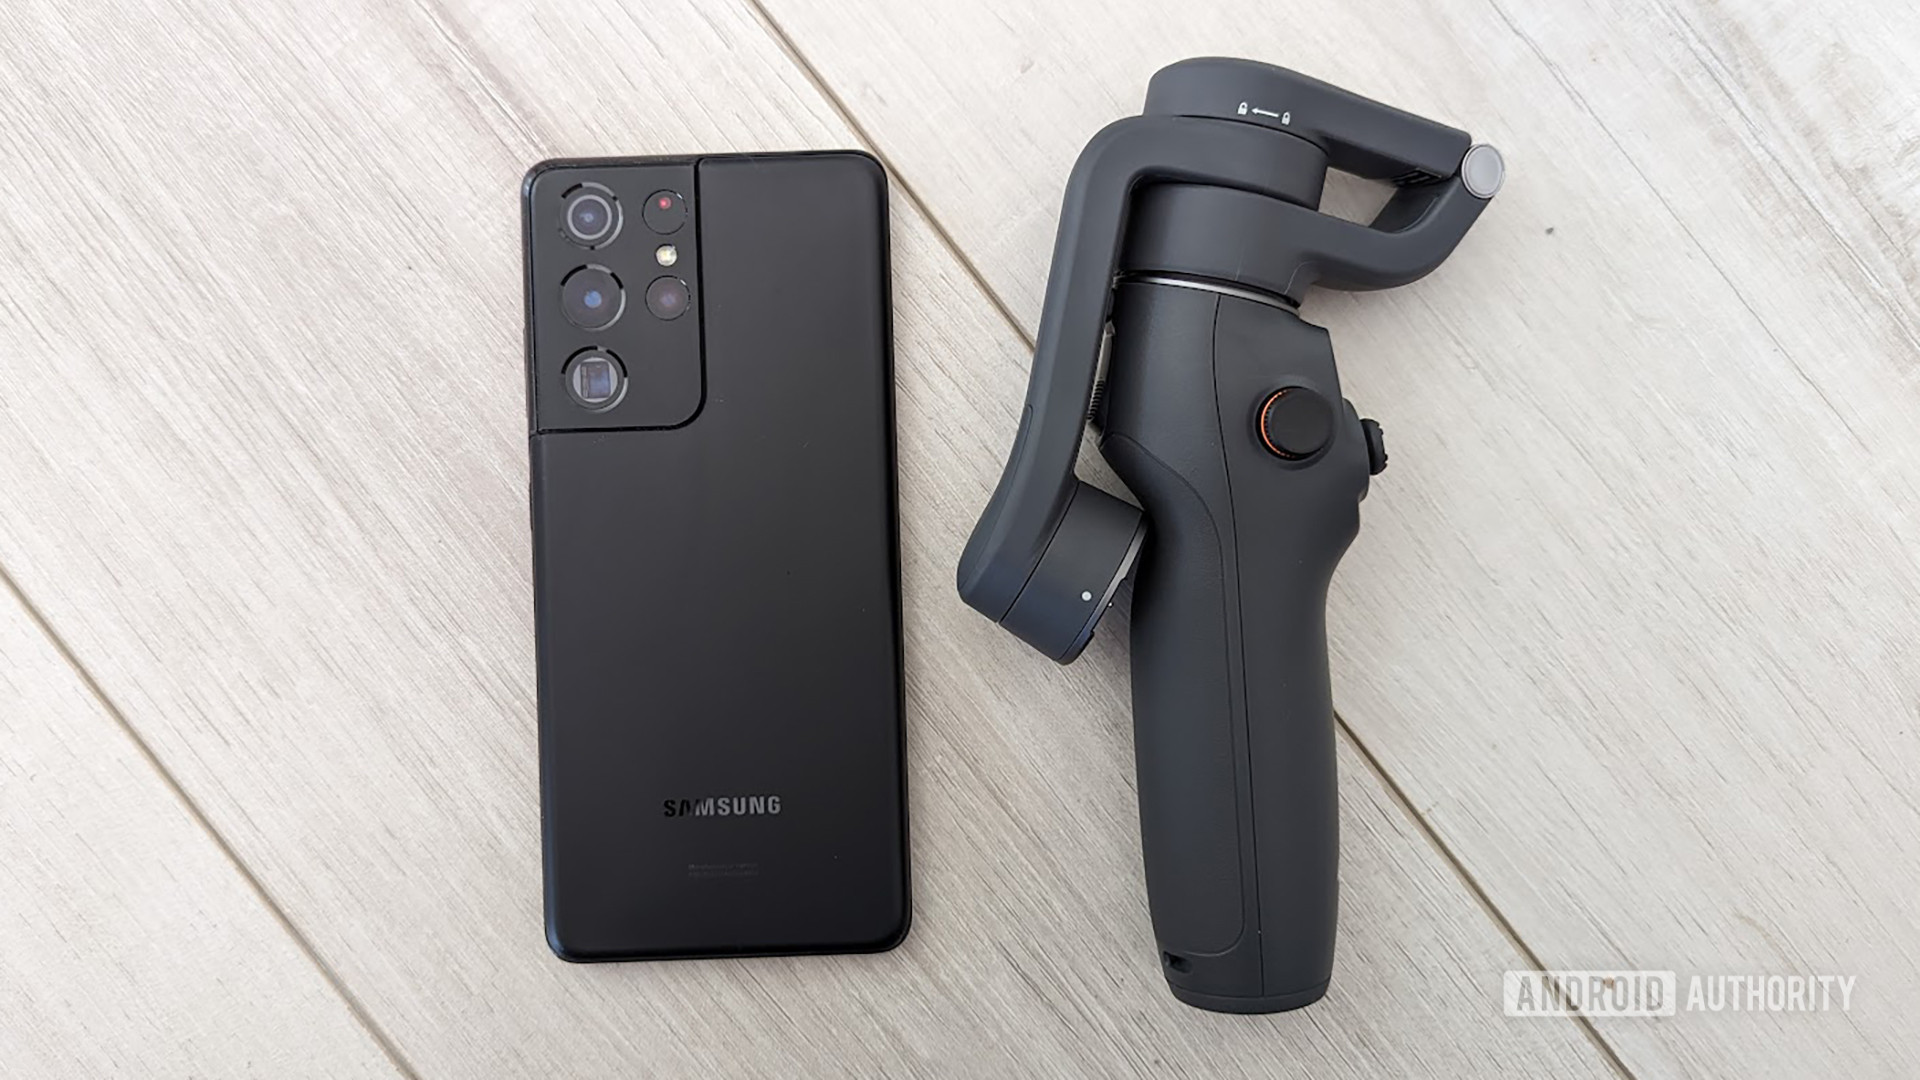 DJI Osmo Mobile 6 Review Next To Galaxy S21 Ultra